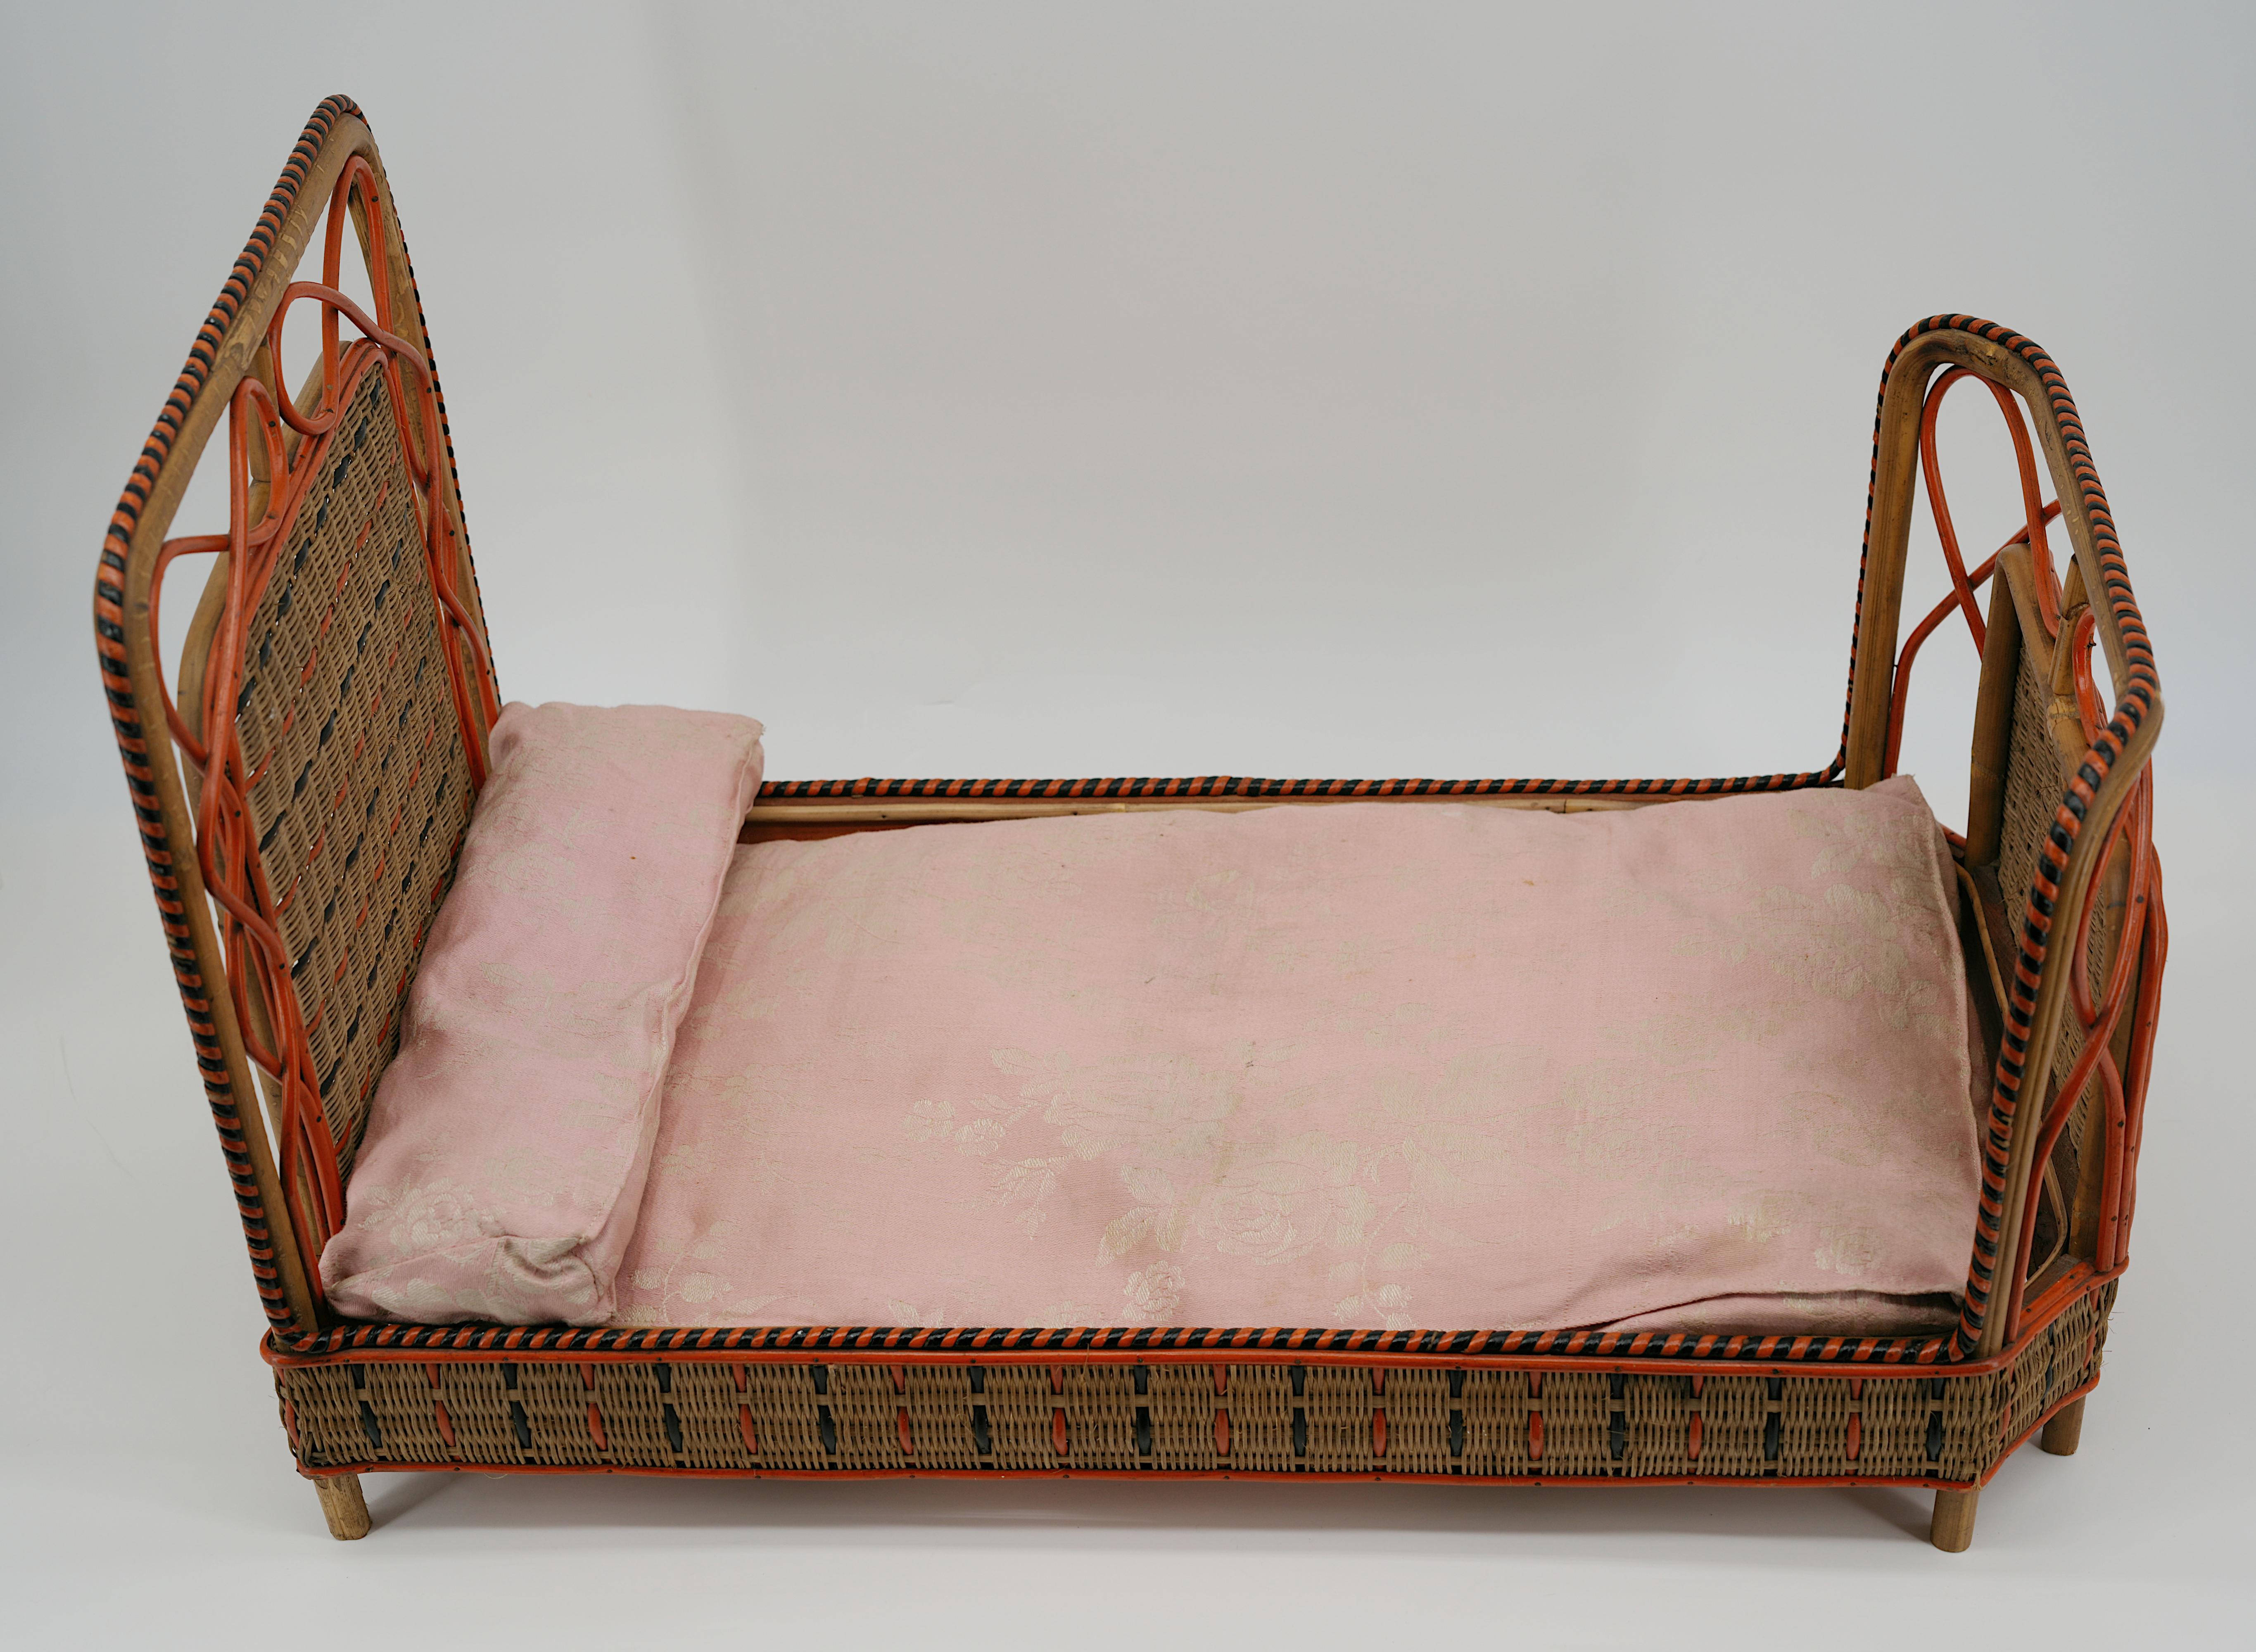 French Bamboo & Rattan Doll's Bedroom, Playhouse, ca.1900 For Sale 1